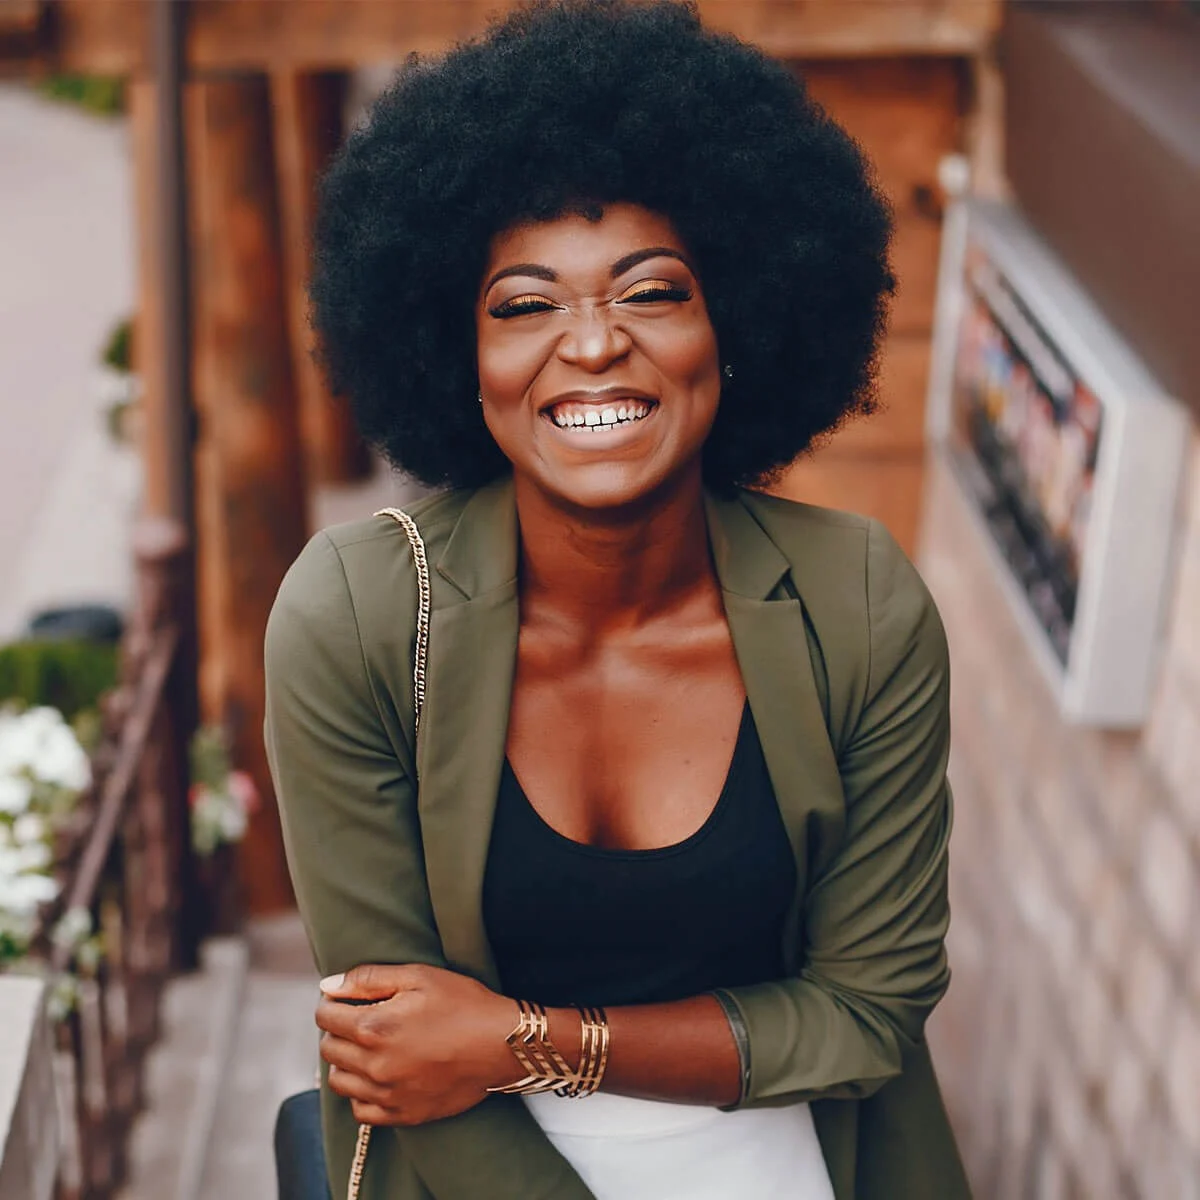 A woman with afro hair smiling for the camera.